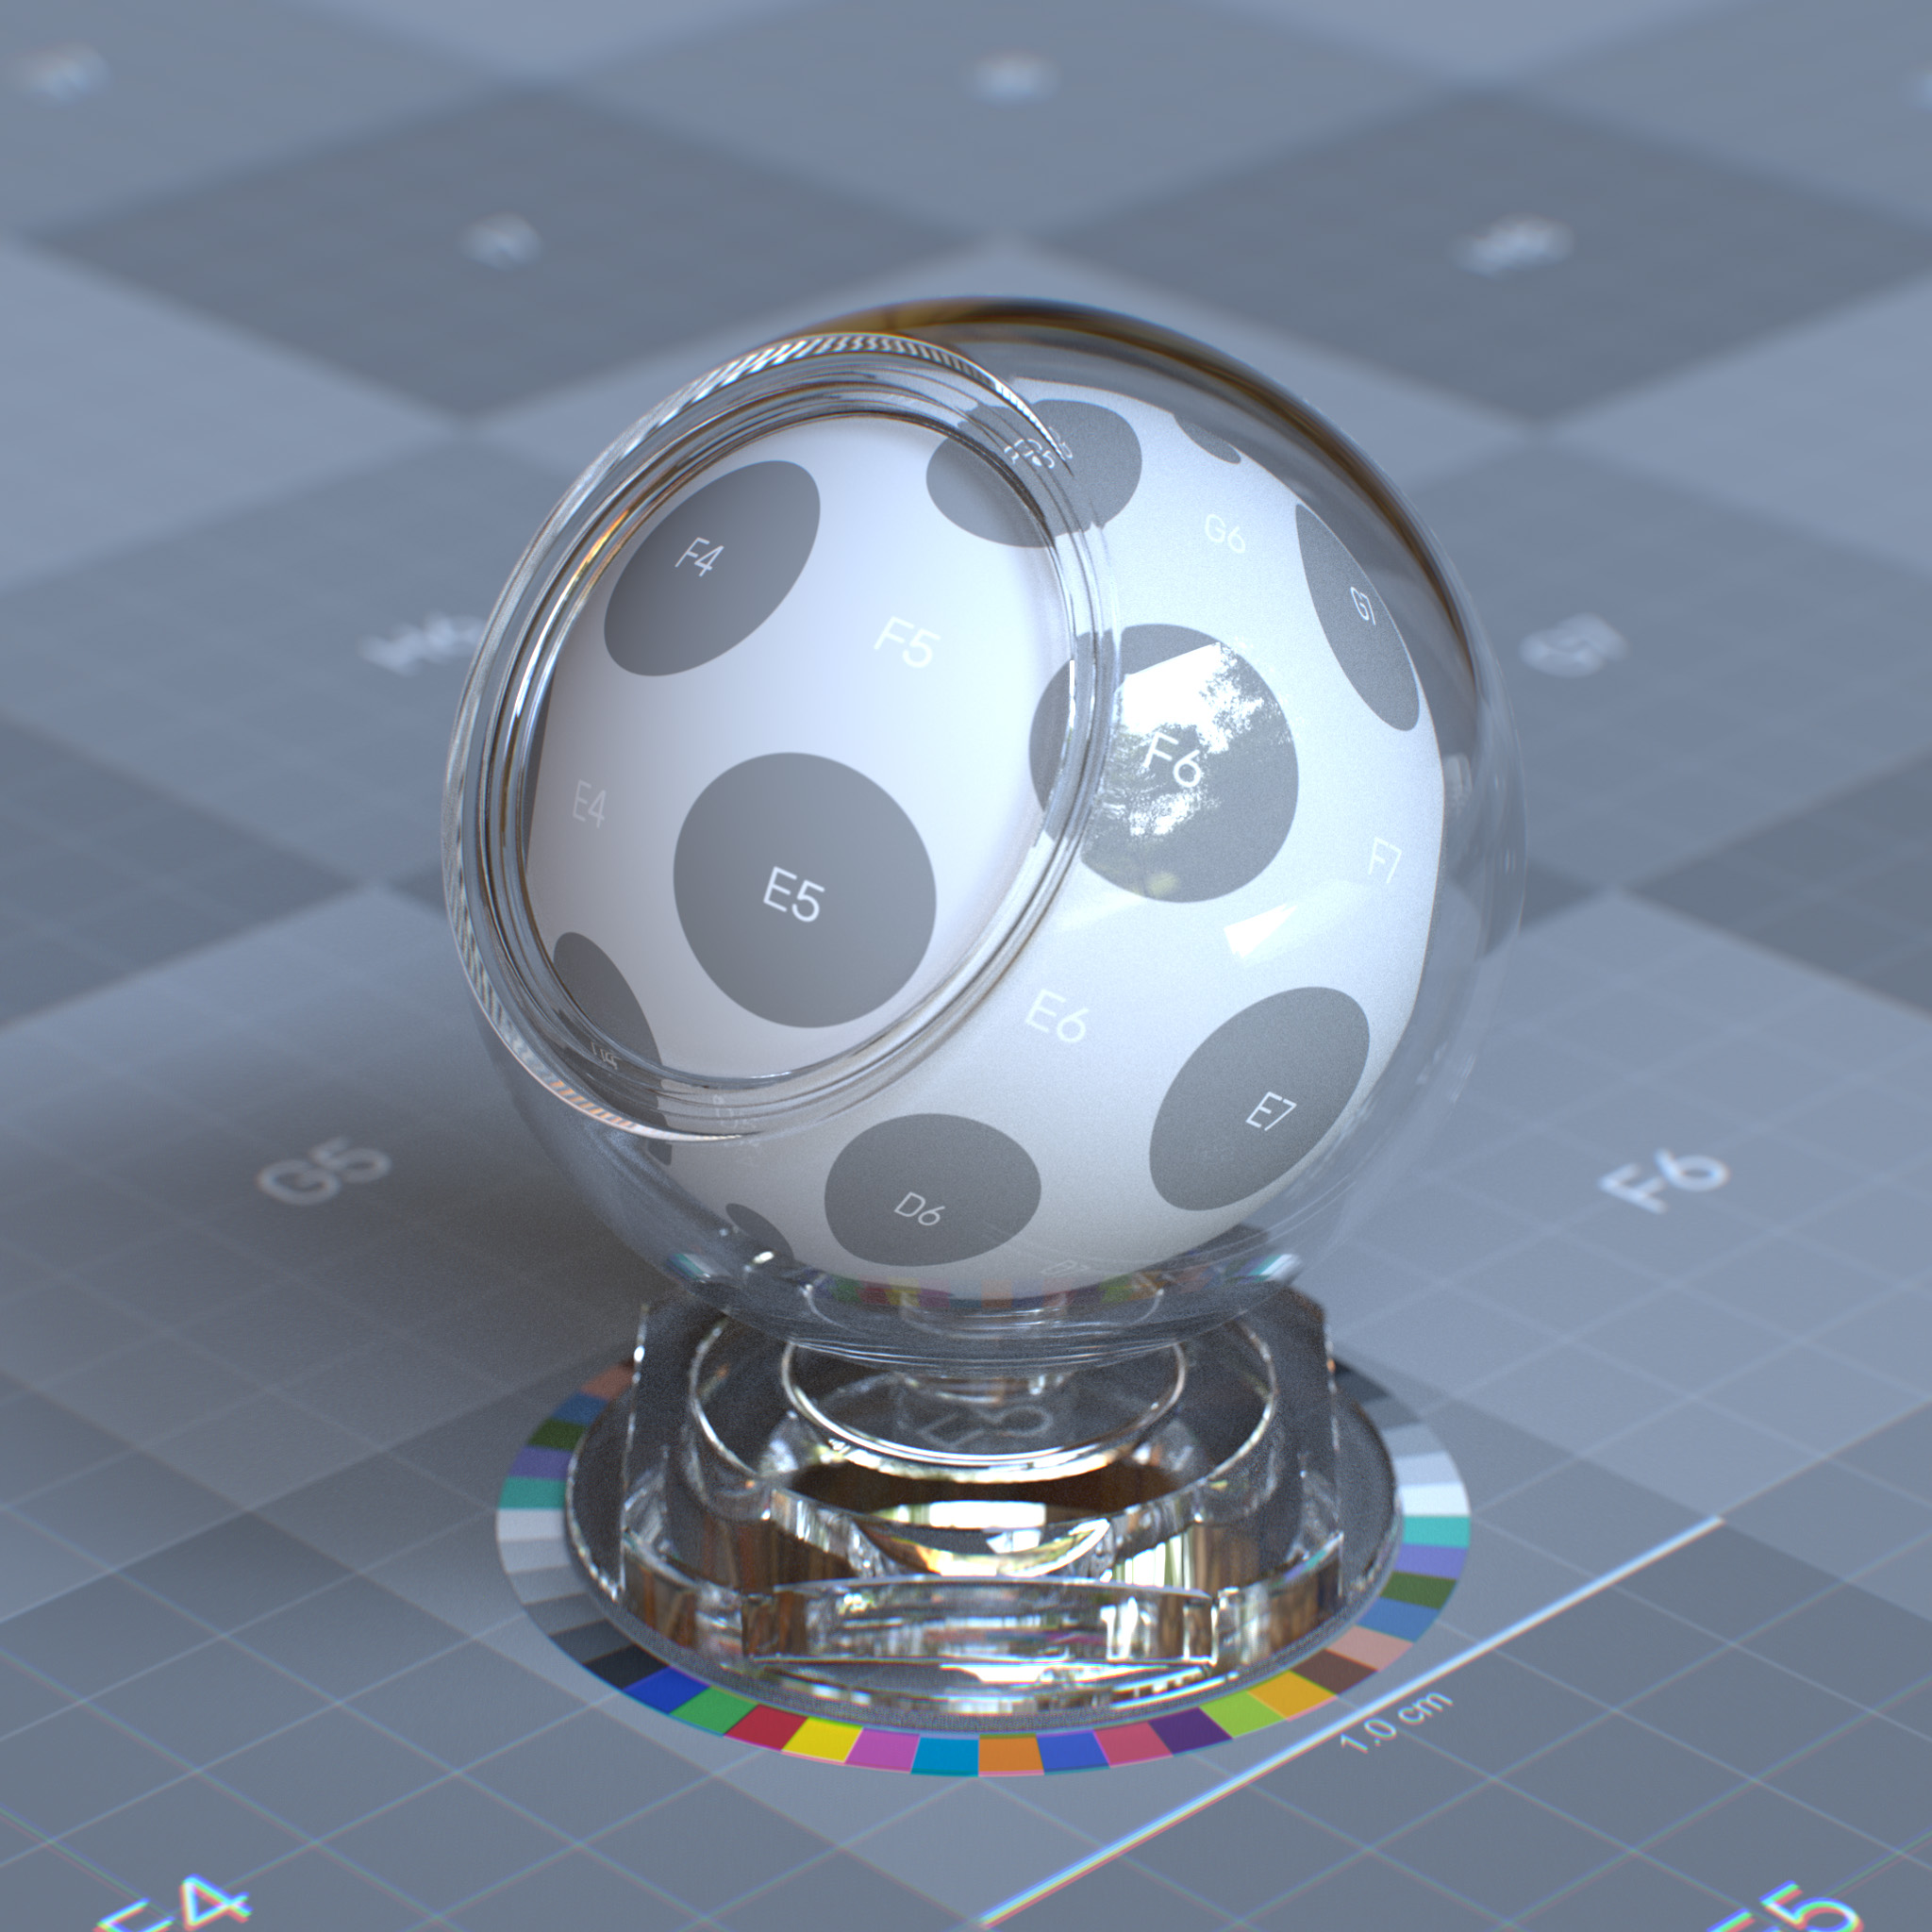 rtx_material_omnisurfacebase_specular_transmission_weight_1p0